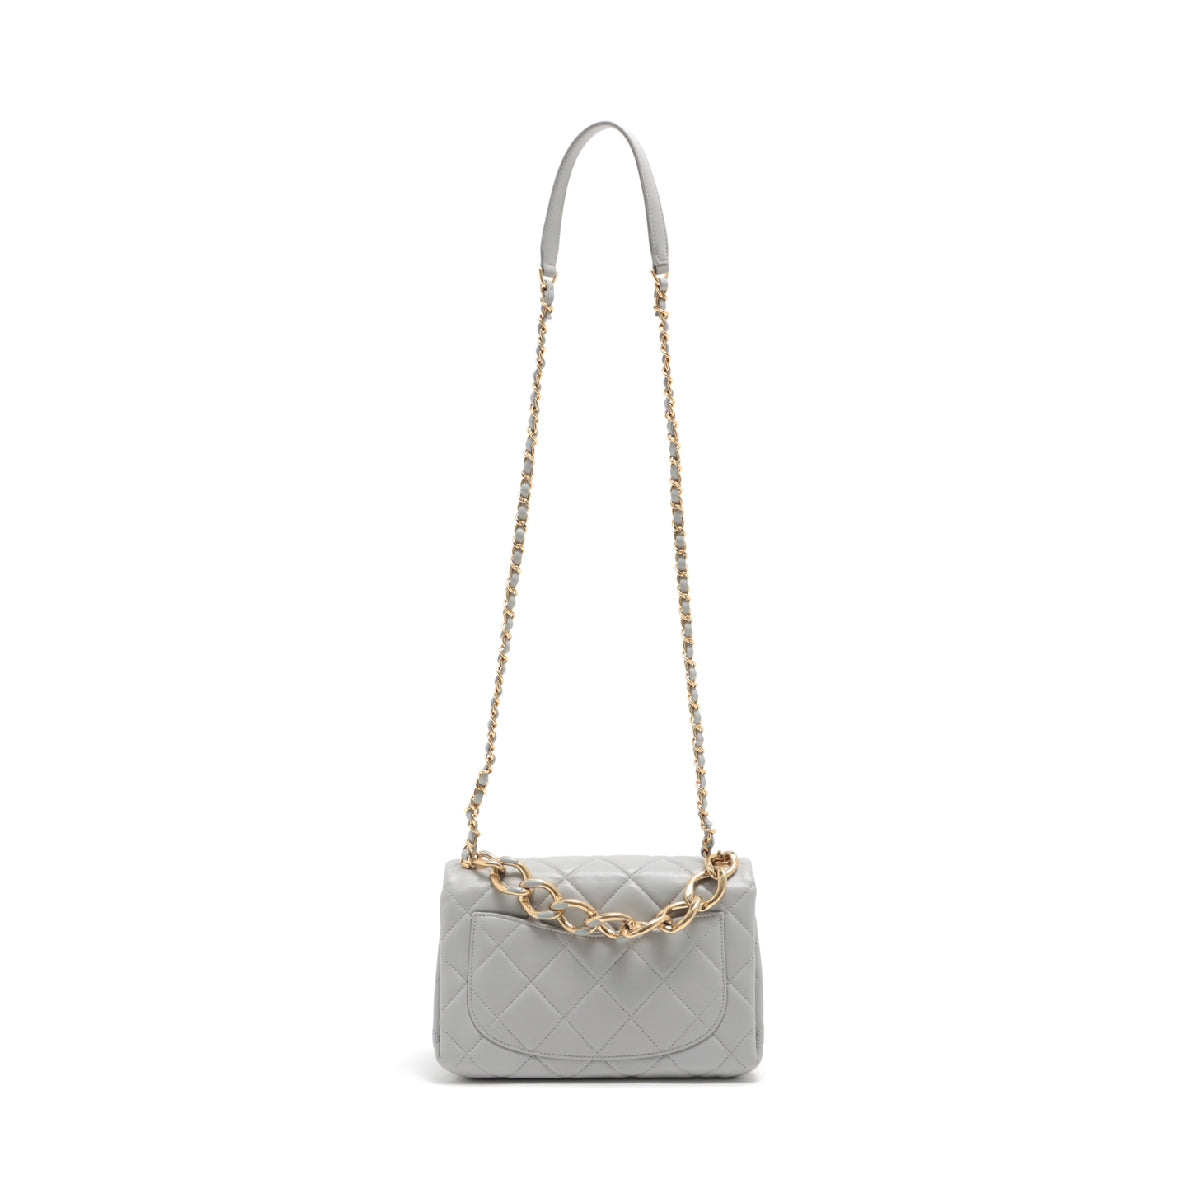 Chanel Matelasse Lambskin Chain shoulder bag Grey Gold Metal fittings There is an IC chip